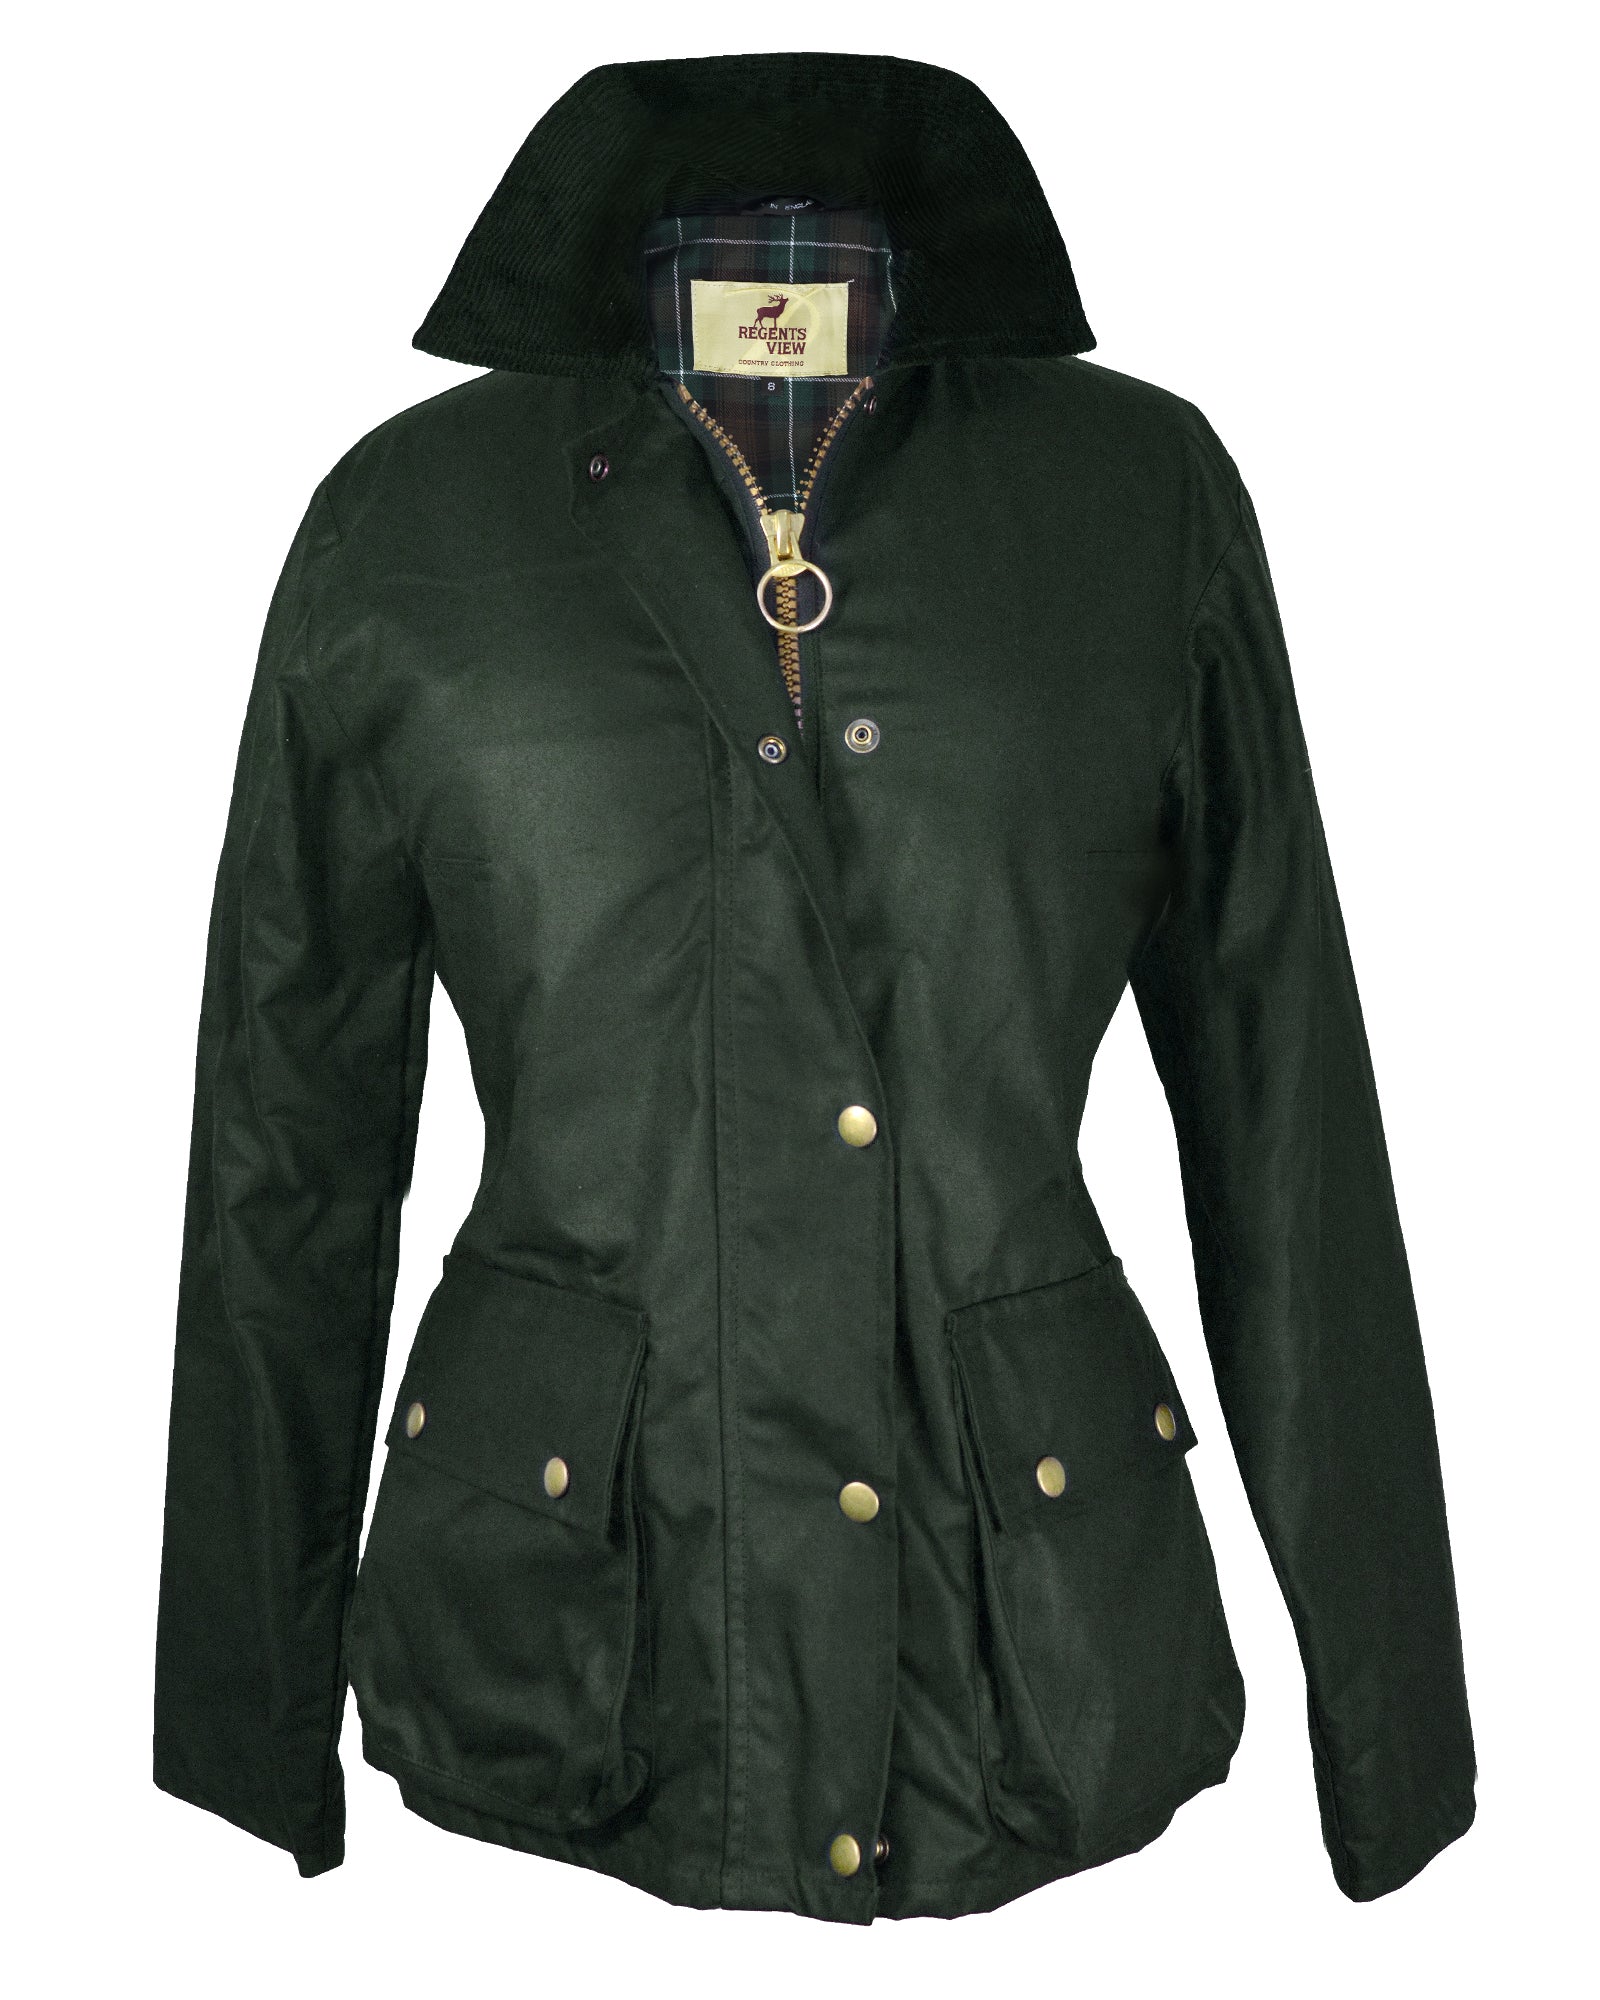 fitted wax jacket womens